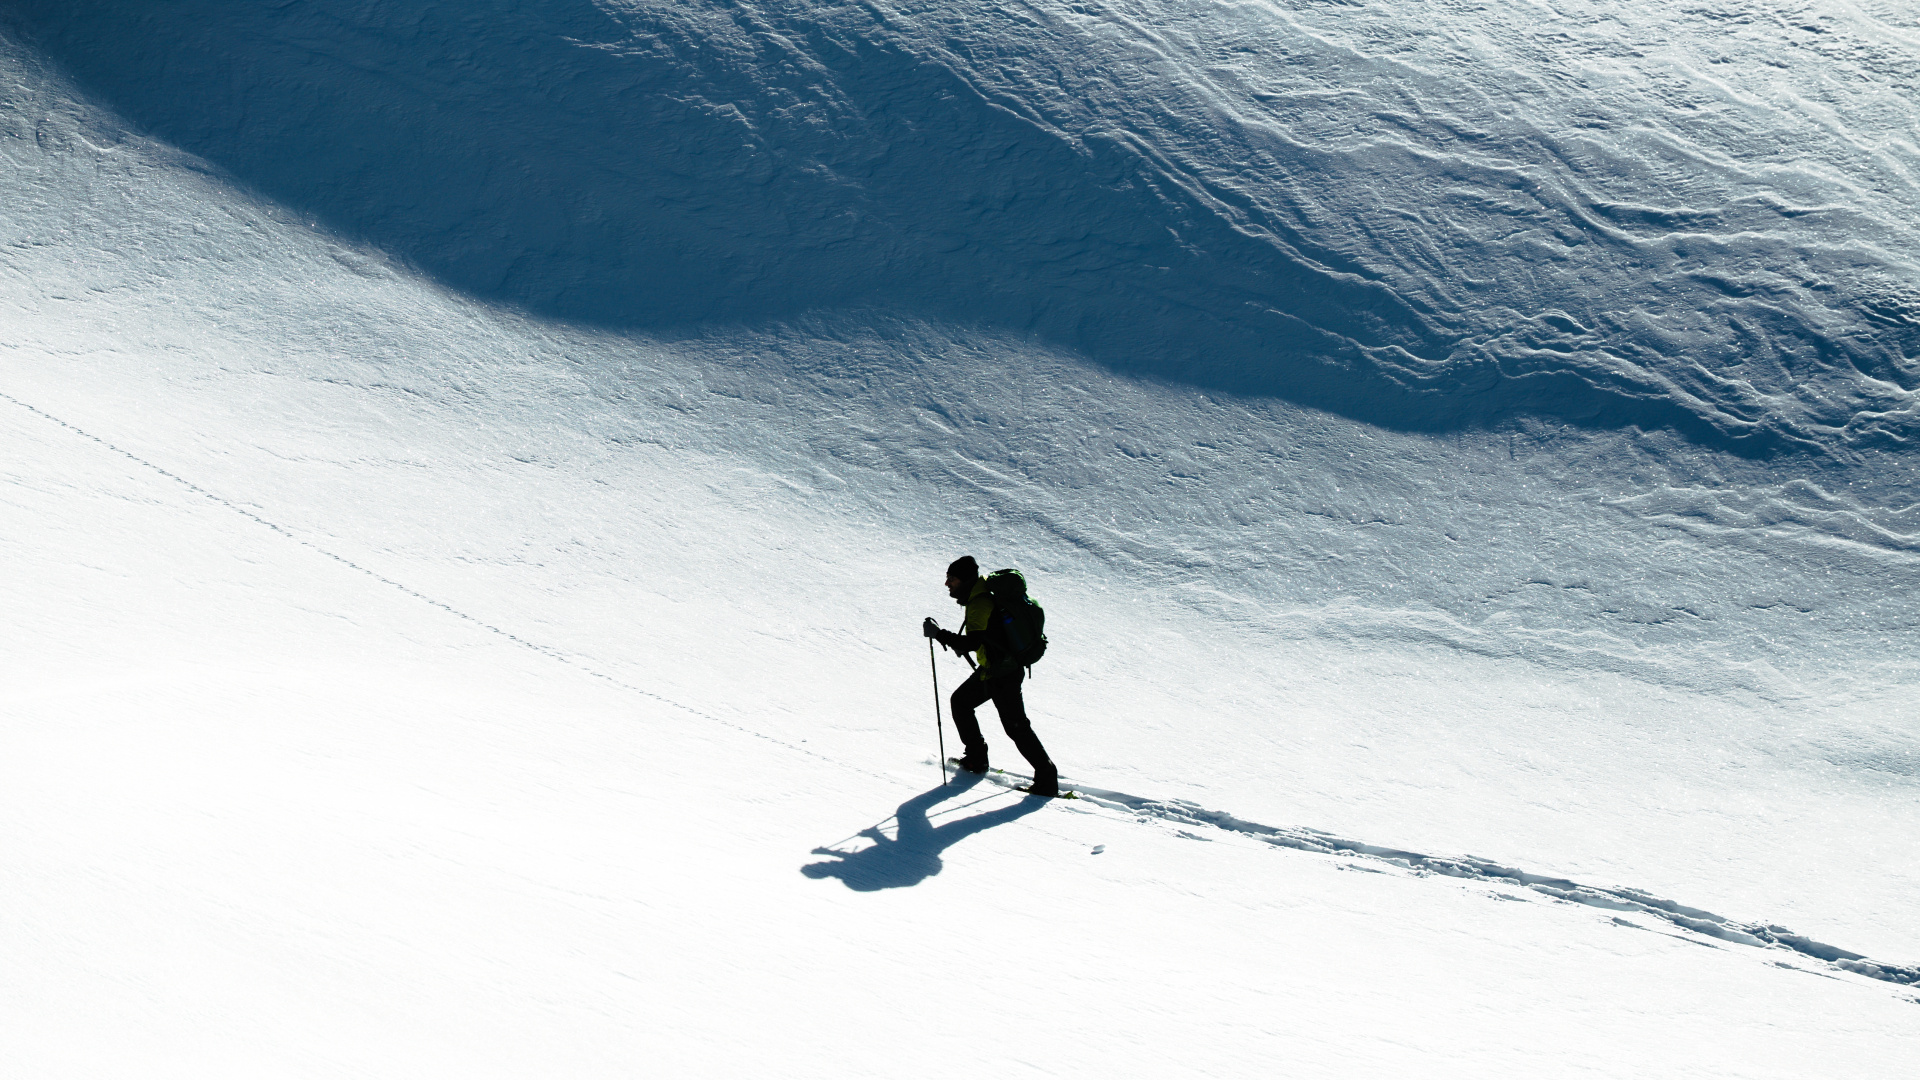 Man in Black Jacket and Pants Riding on Snowboard During Daytime. Wallpaper in 1920x1080 Resolution